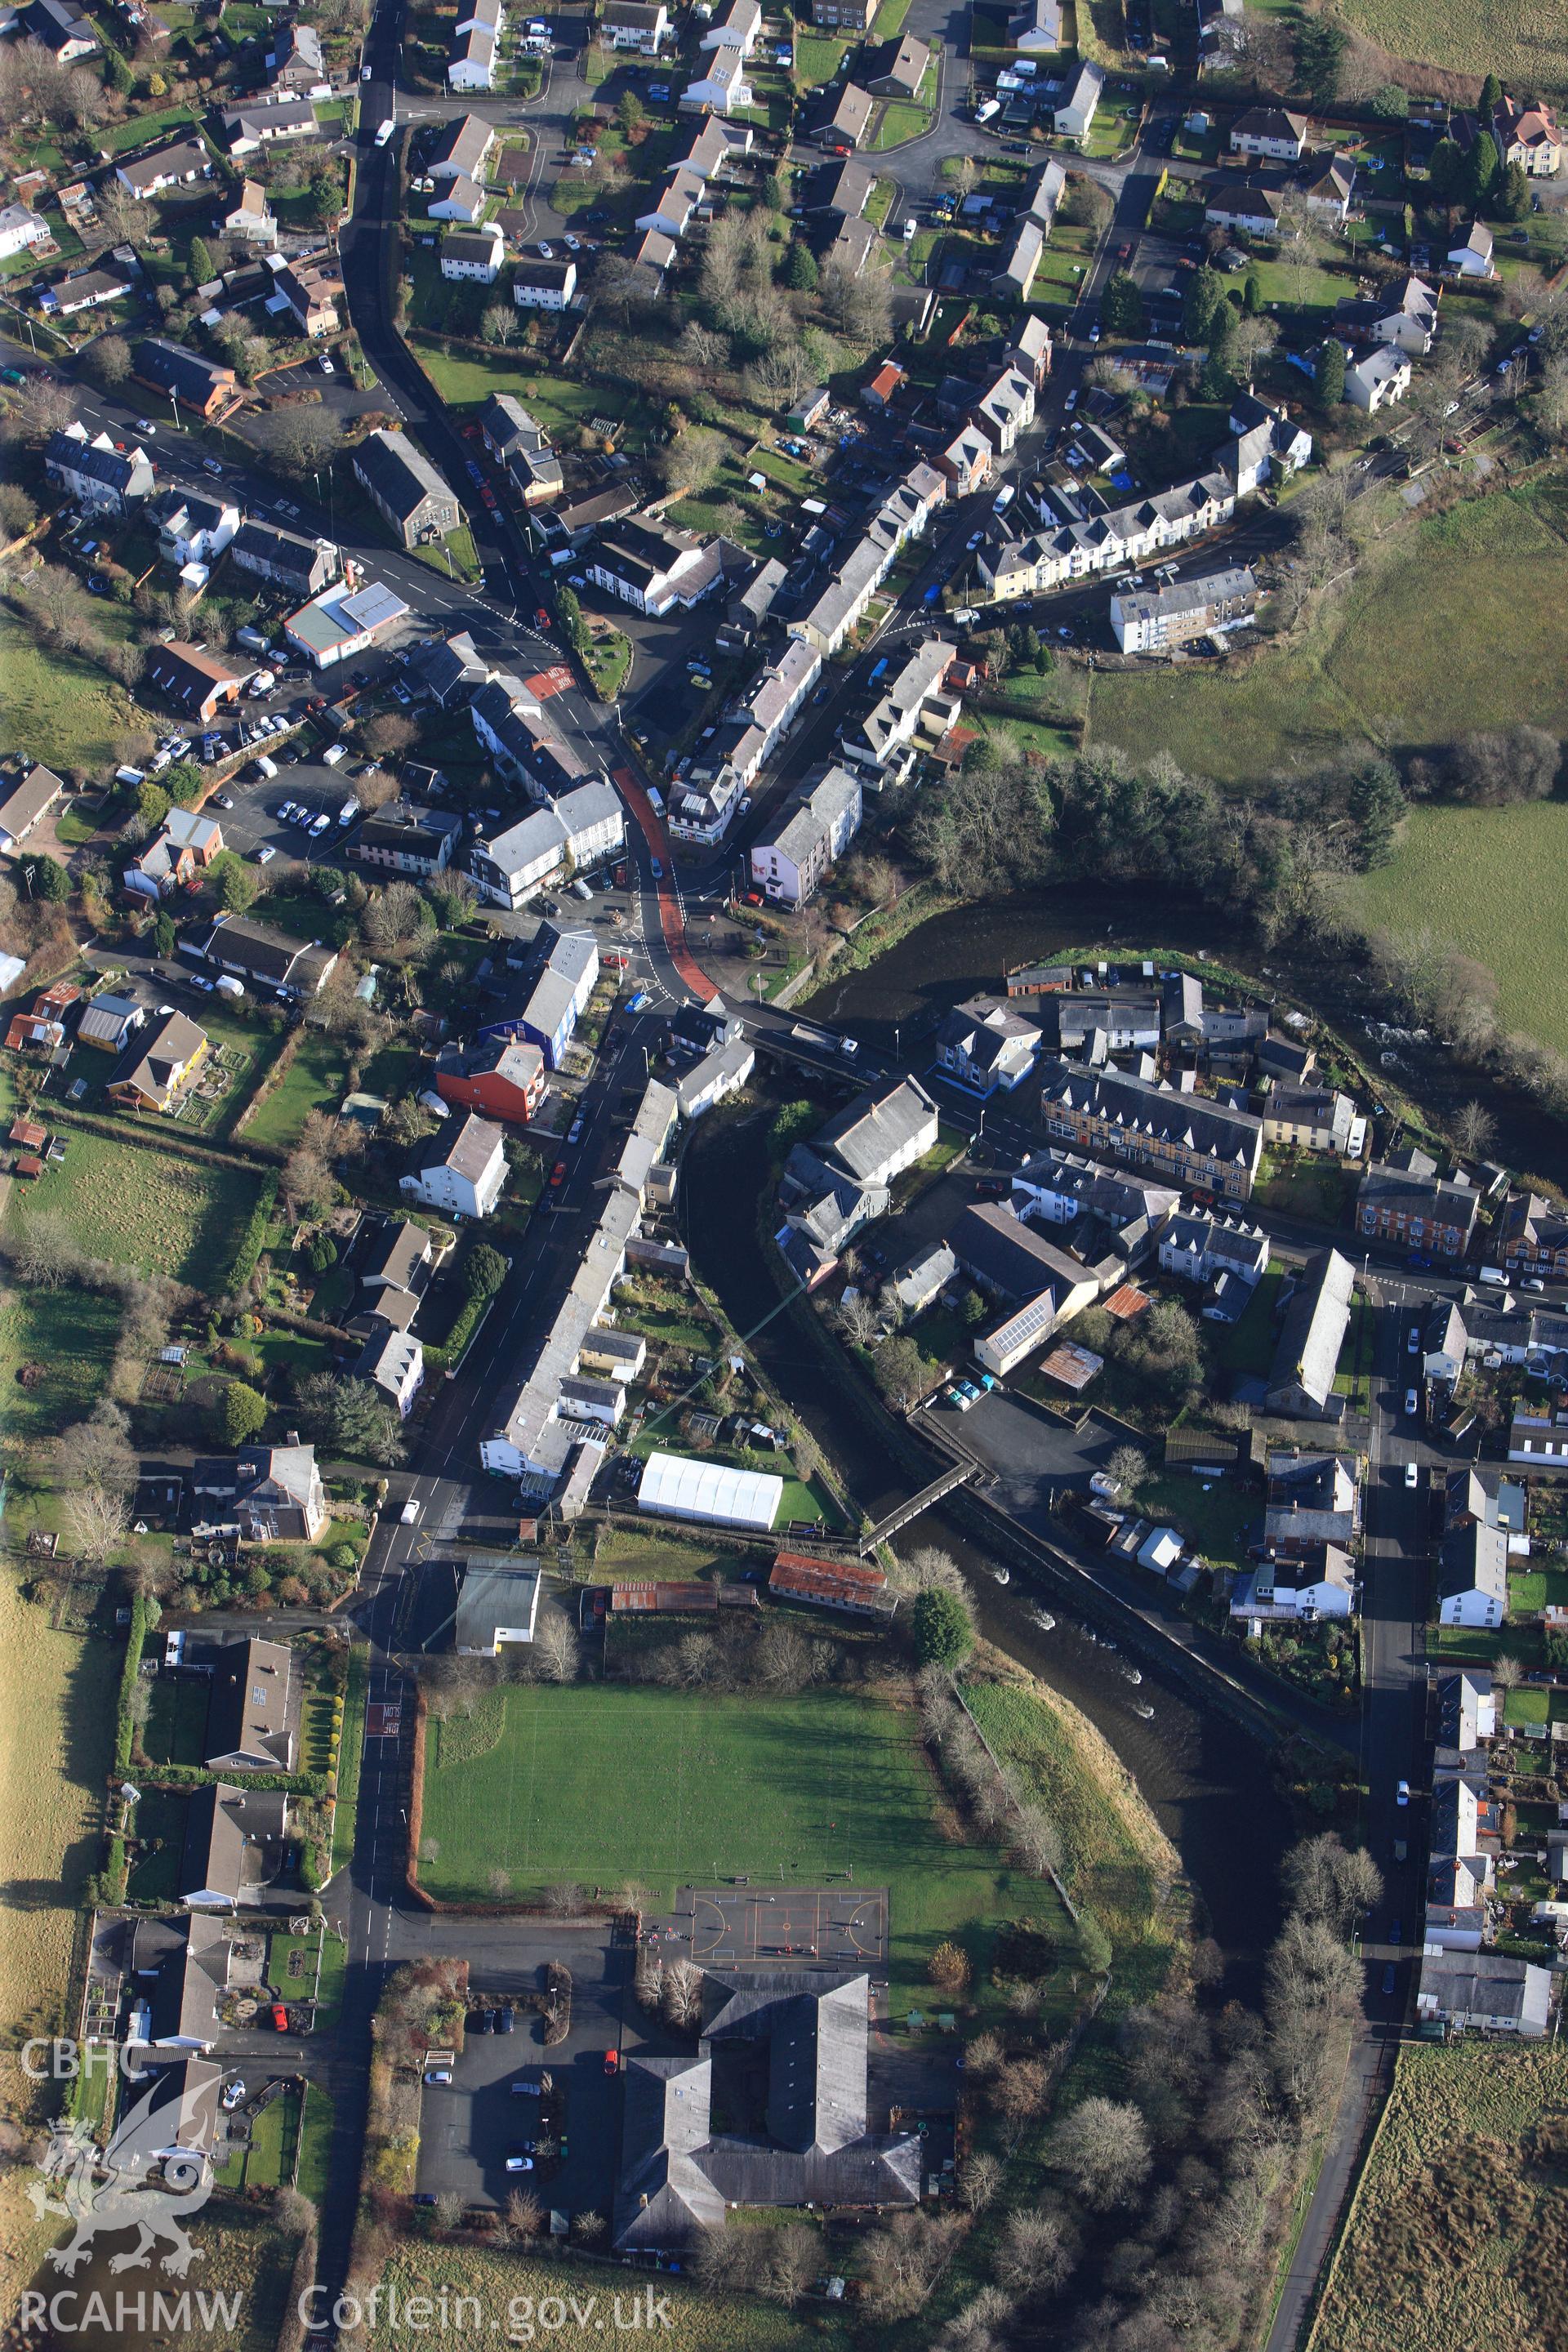 RCAHMW colour oblique photograph of Llanwrtyd Wells, town. Taken by Toby Driver on 23/11/2012.